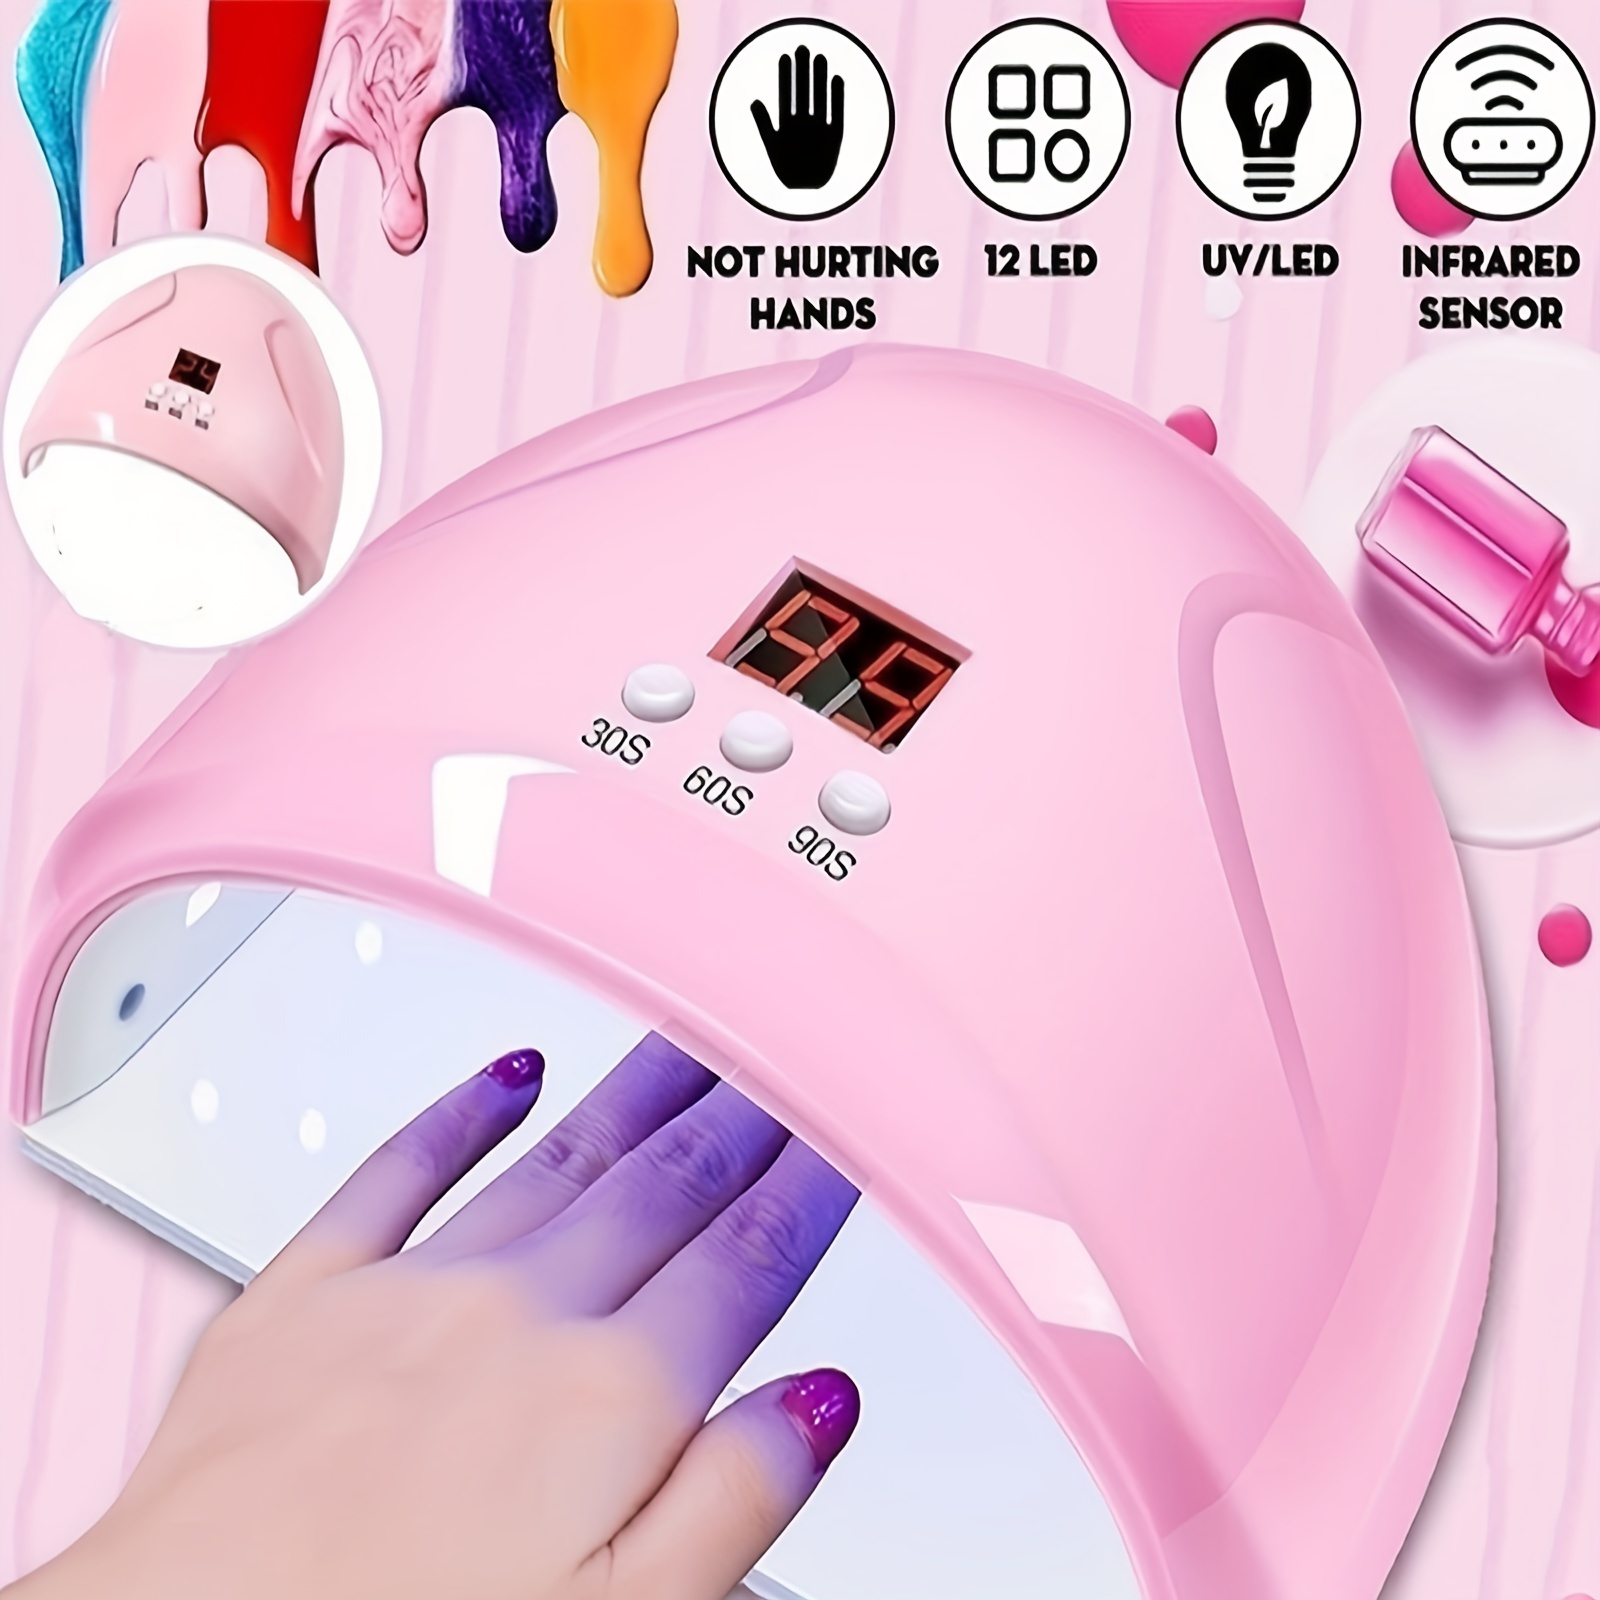 LKE UV Nail Lamp, Nail Dryer 220W UV Light for Nails with 4 Timers